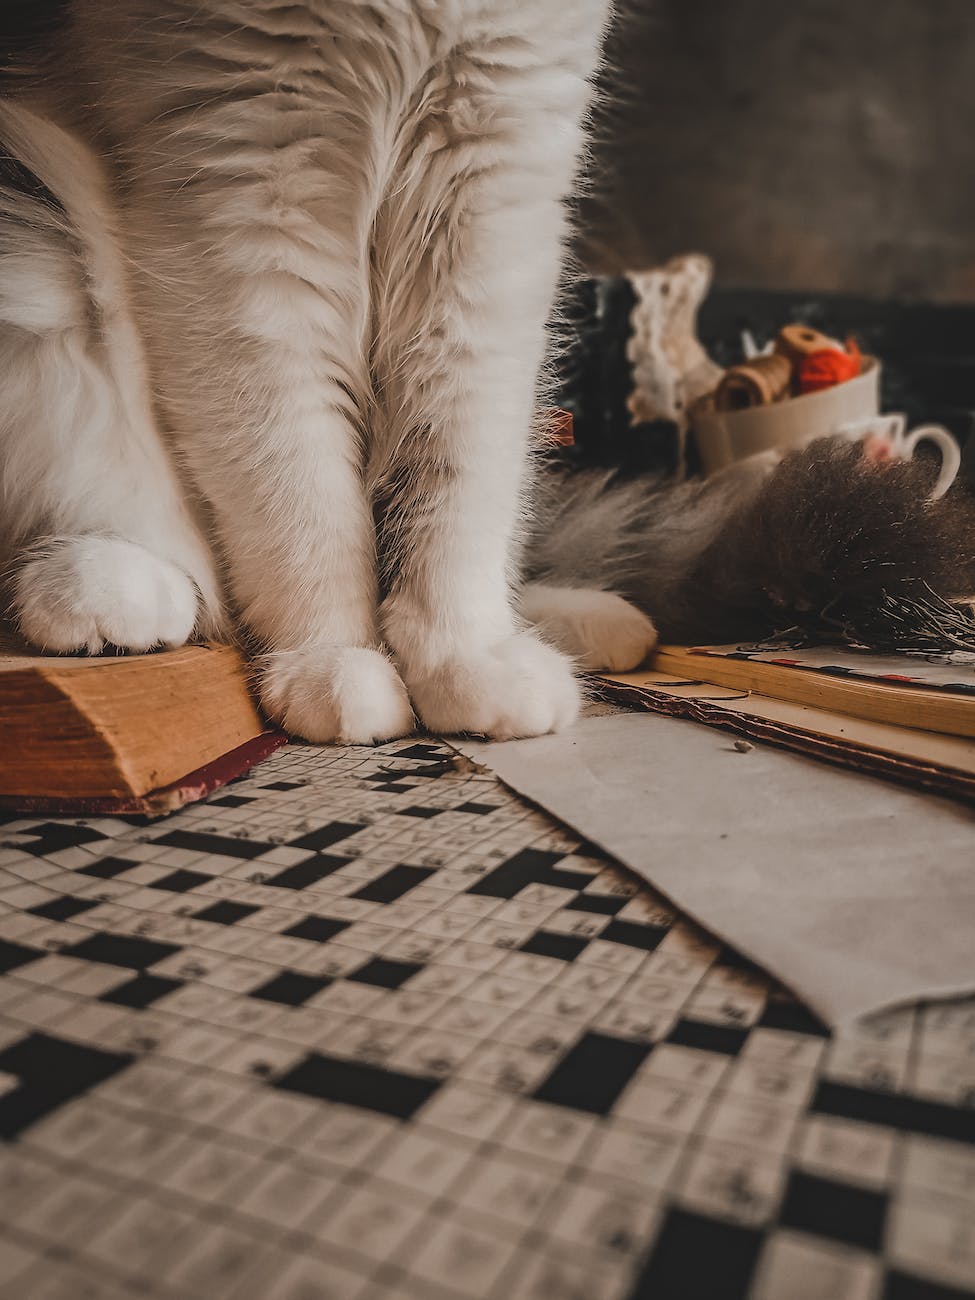 cat paws sitting on a book and crossword puzzle